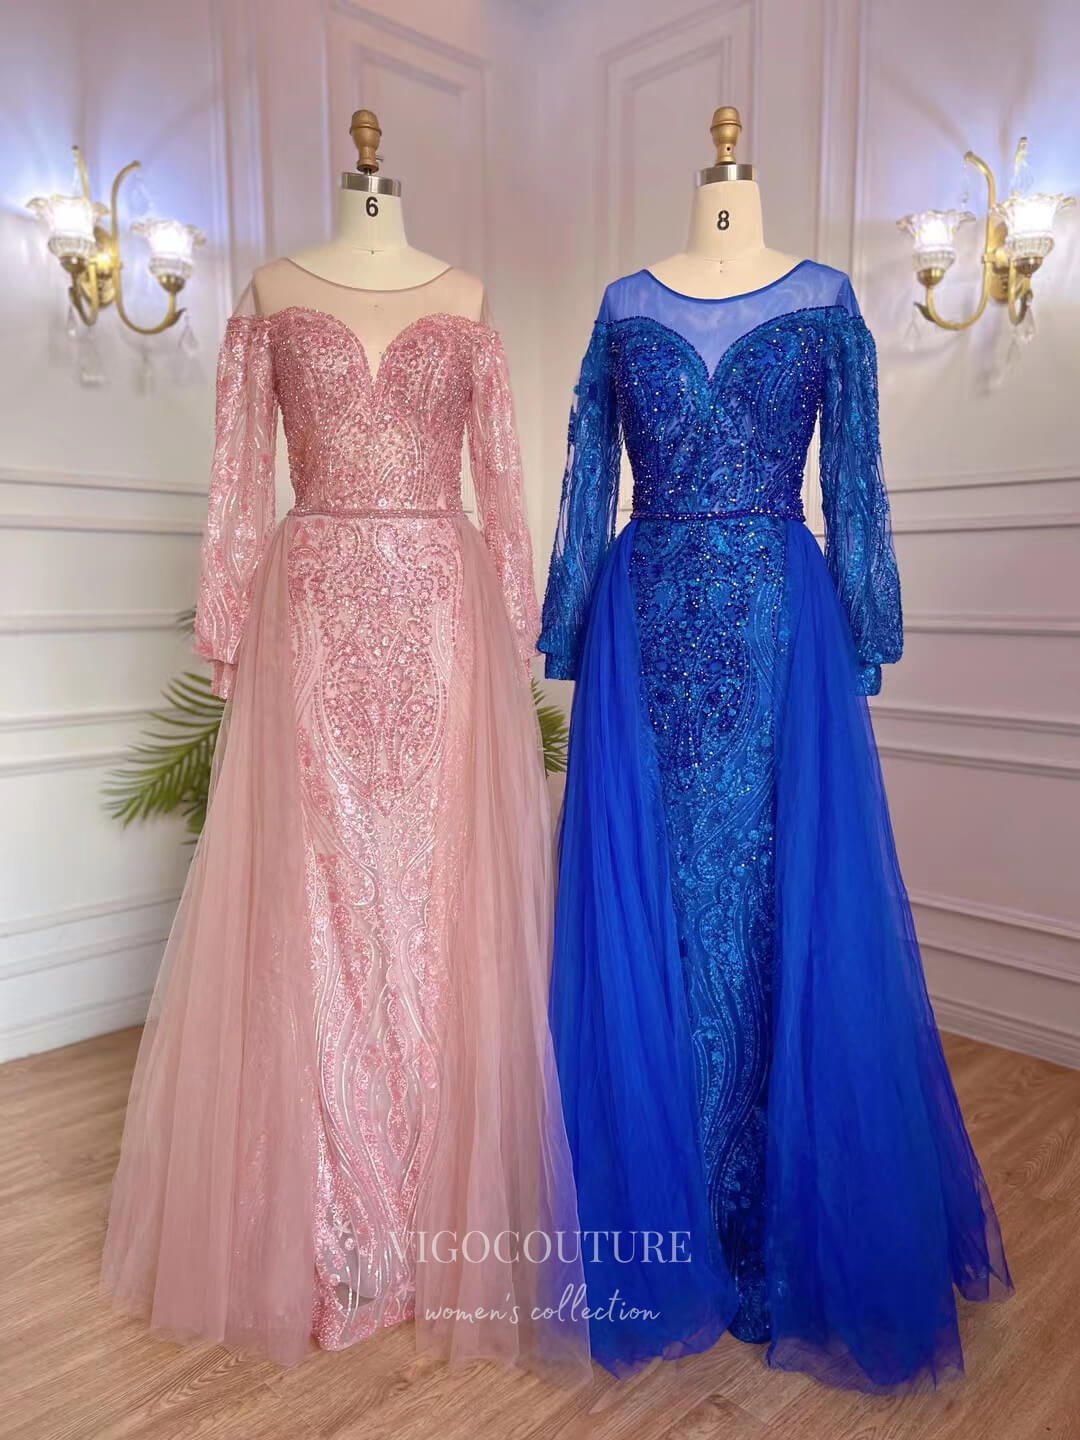 Beaded Lace Prom Dresses Long Sleeve Overskirt Mother of the Bride Dresses 22117-Prom Dresses-vigocouture-Pink-US2-vigocouture